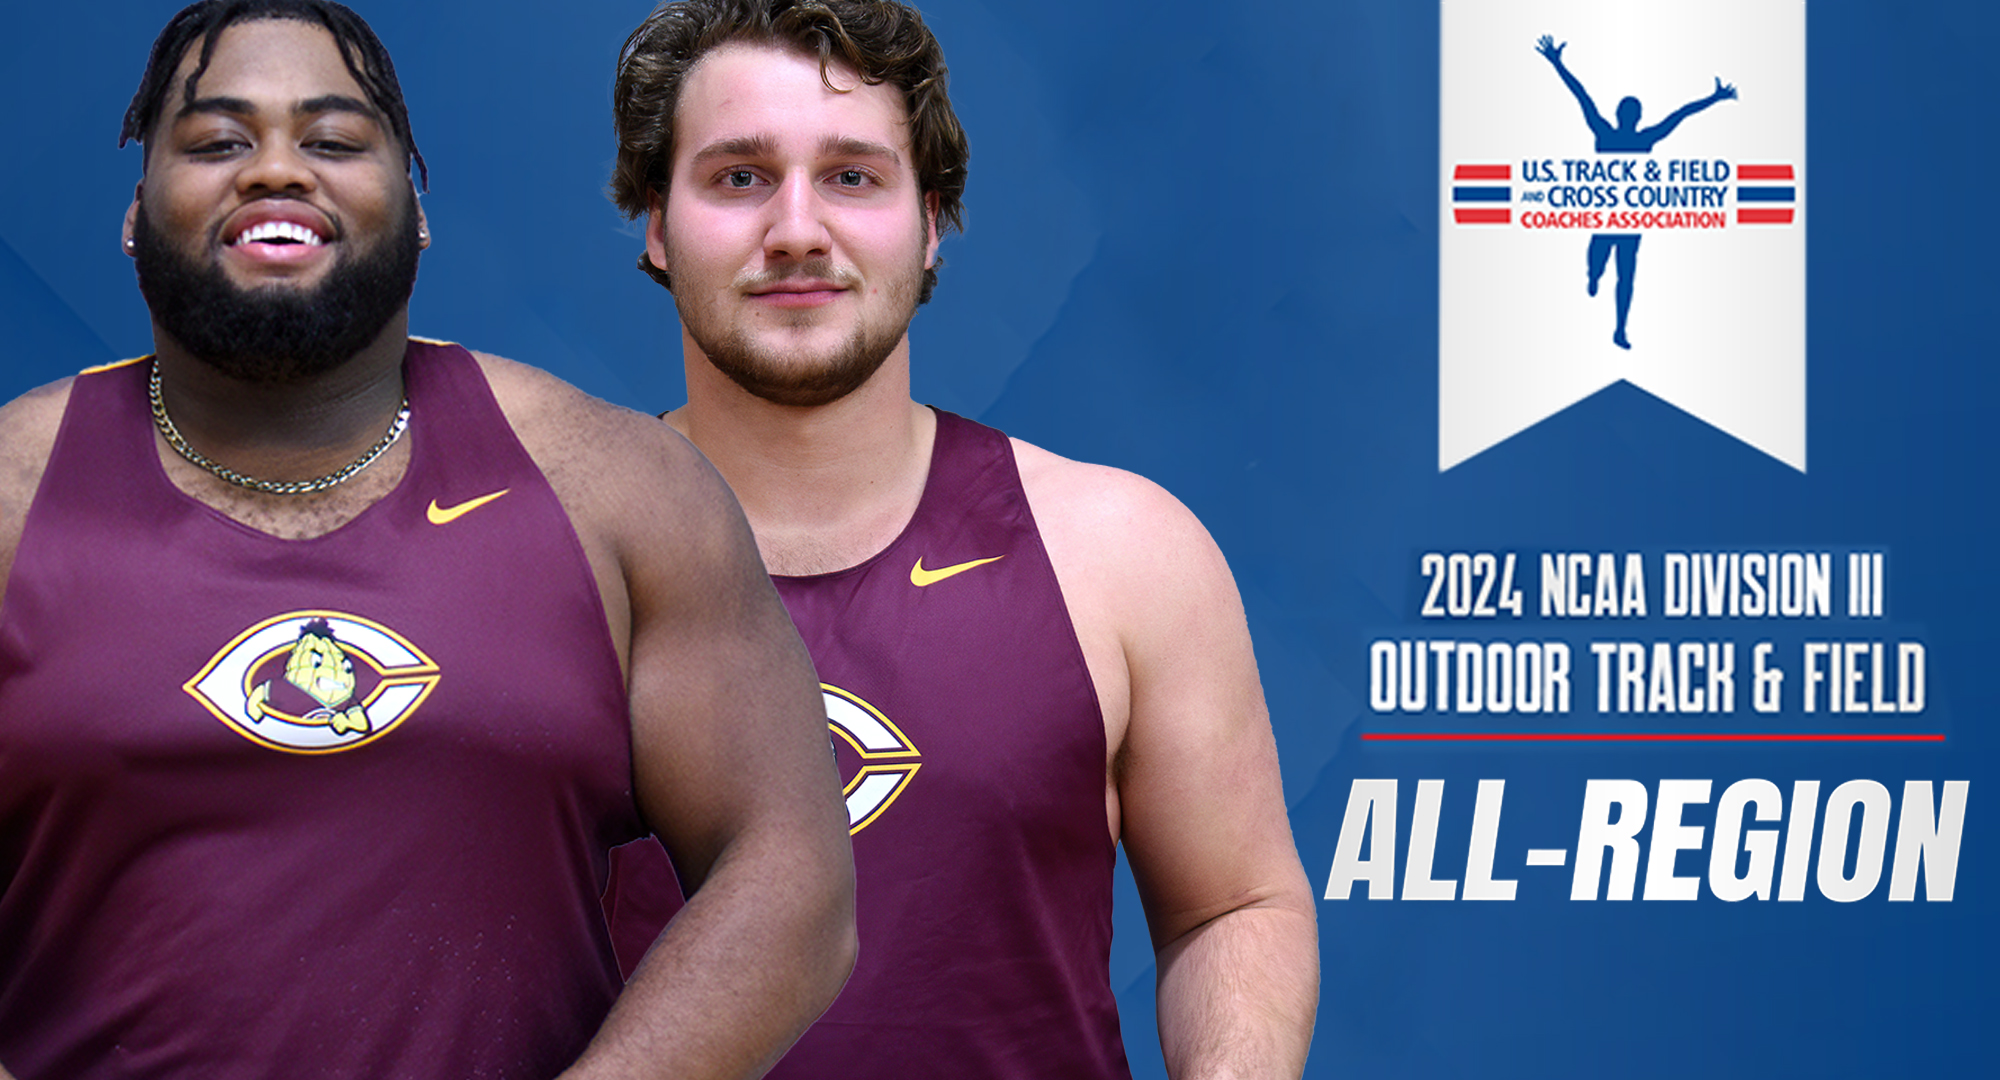 Senior Cooper Folkestad (L) and first-year thrower Elijah Hayes received USTFCCCA All-Region honors for finishing in the Top 5 of an event.